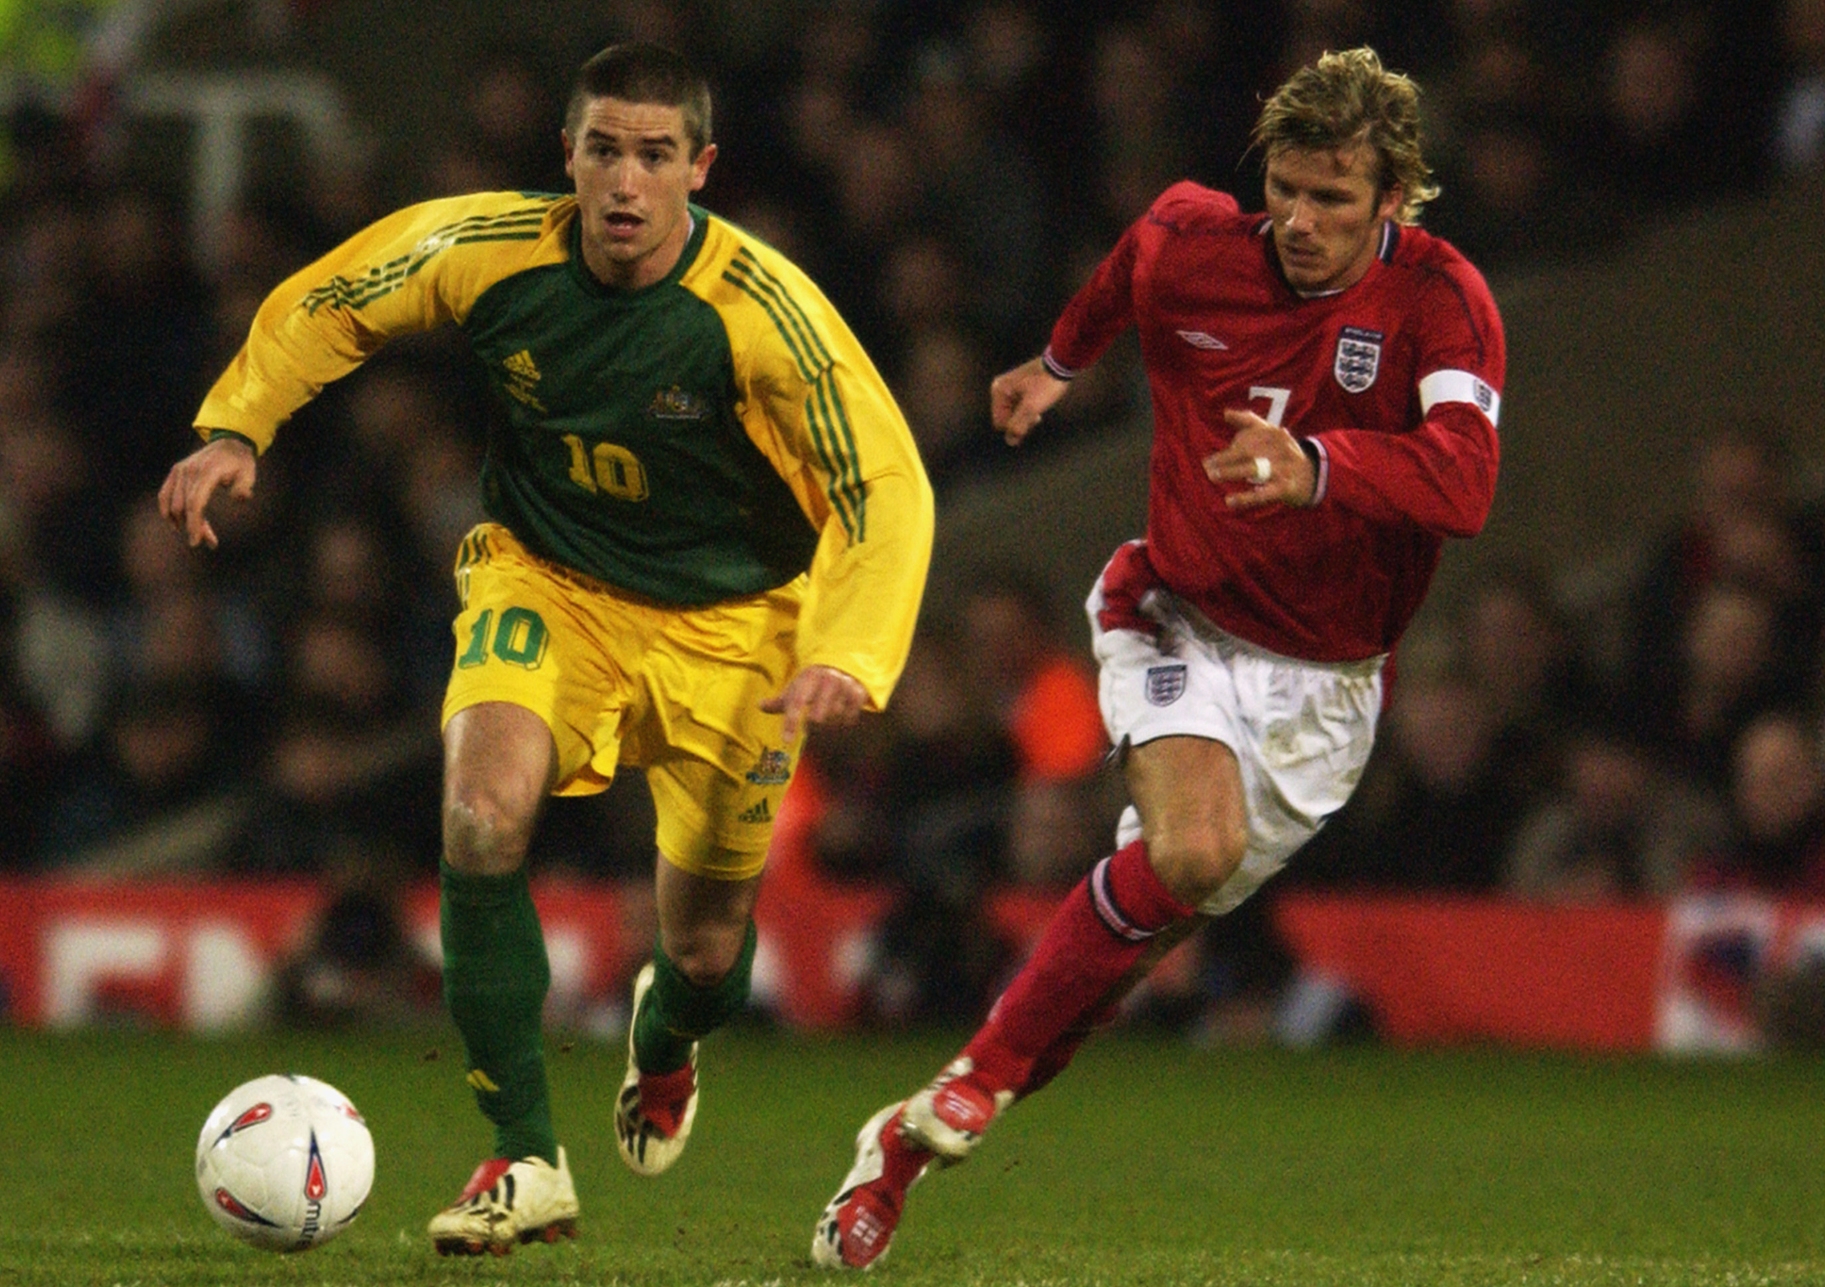 England couldn't contain the speed and skill of Harry Kewell